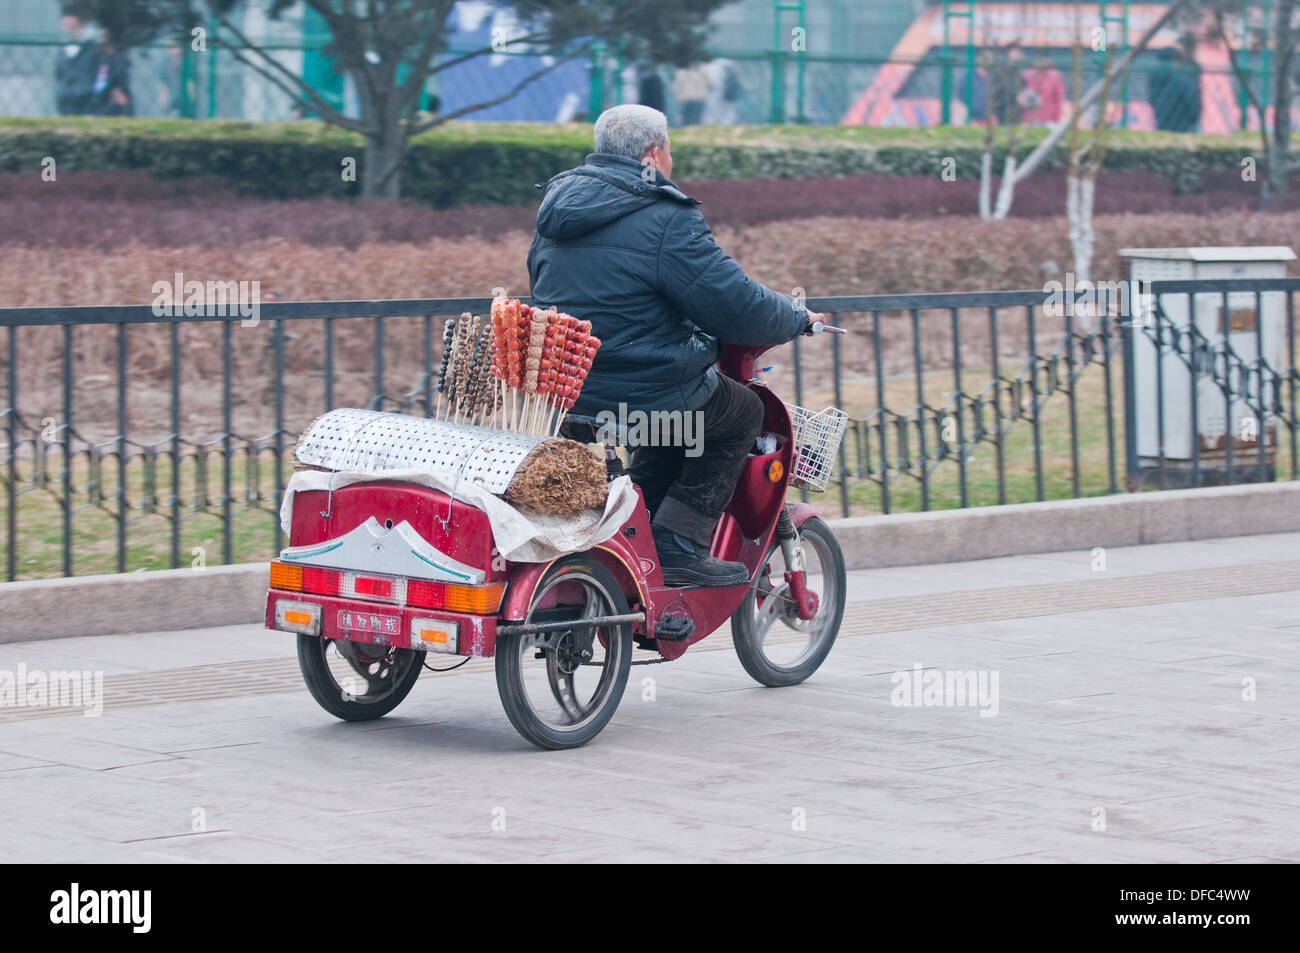 Man driving motorbike with Candied hawberries on a stick (also called crystallized fruit or glace fruit) in Beijing, China Stock Photo